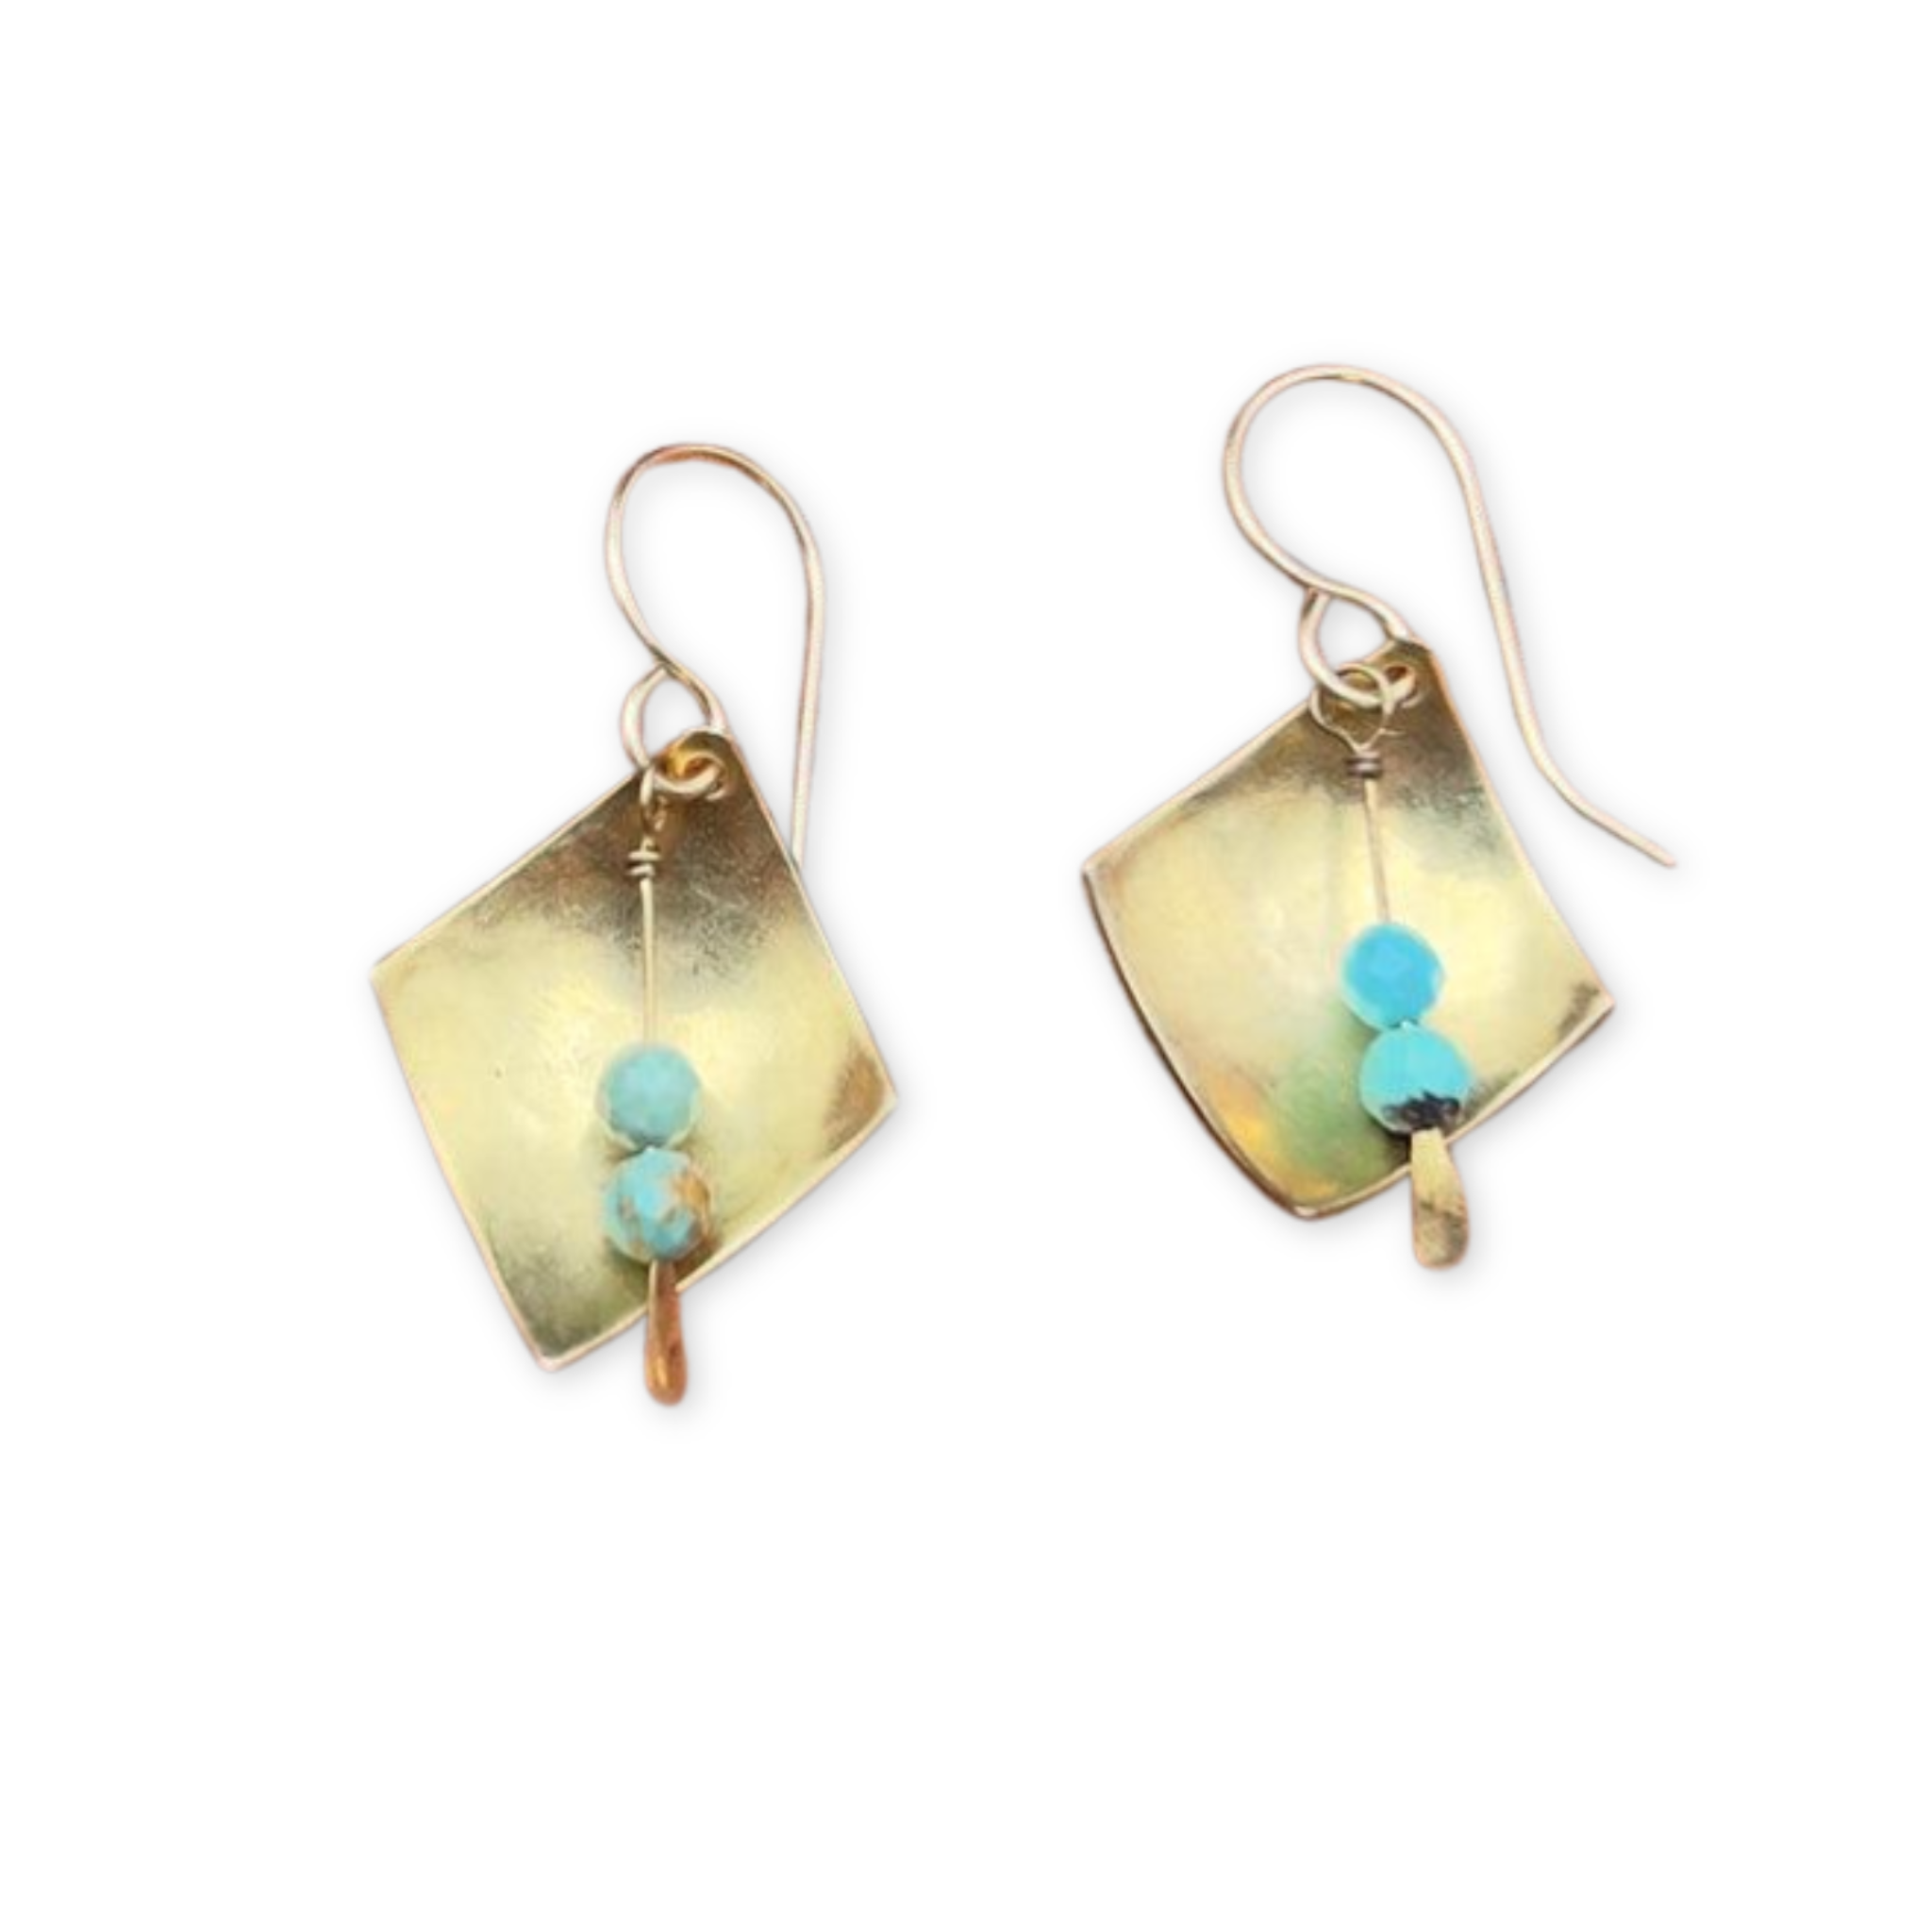 earrings featuring hammered diamond shaped pendants with two turquoise stones